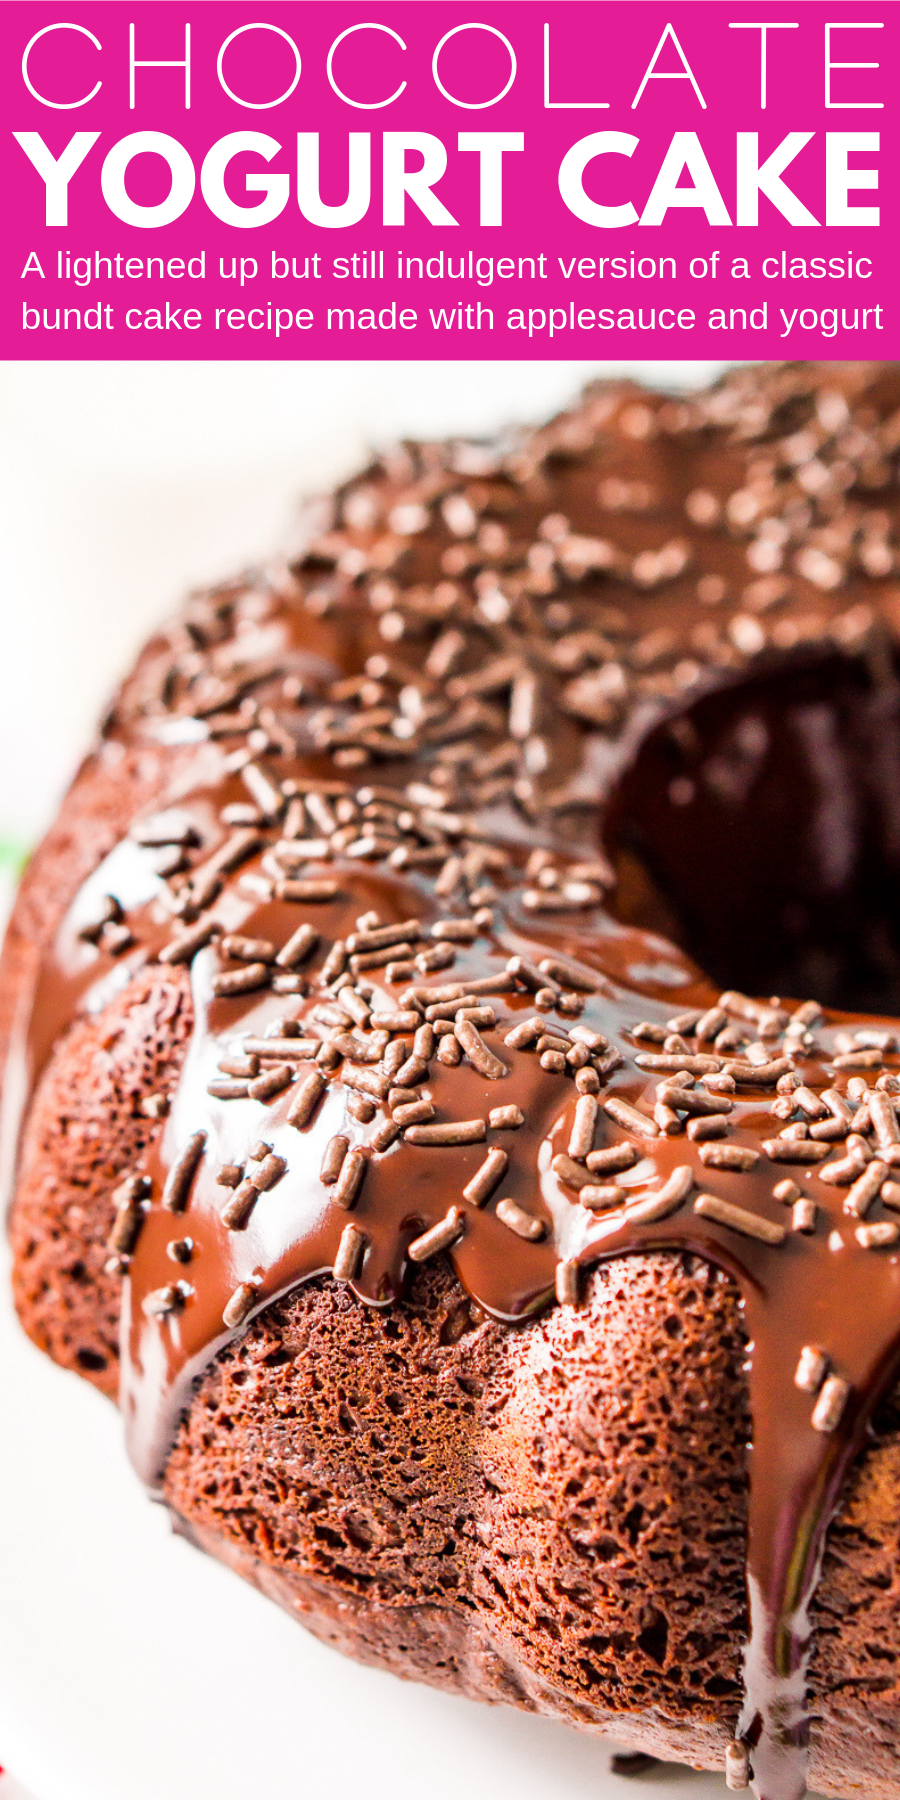 This Healthier Chocolate Yogurt Cake is a lightened up but still indulgent version of a classic bundt cake recipe made with applesauce and yogurt.